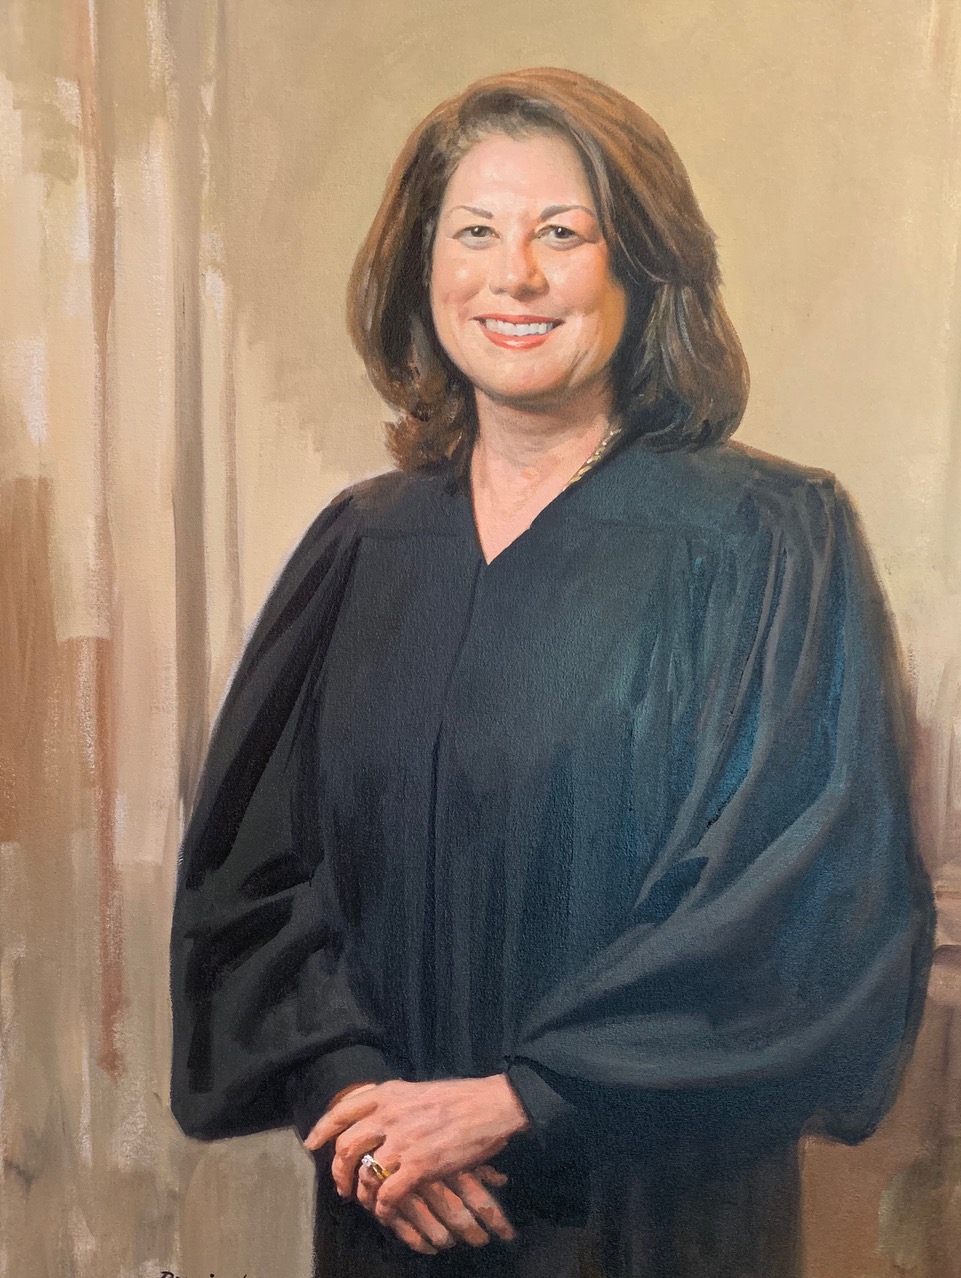 Ross Rossin Portrait Artist in Atlanta's Oil Painting of Judge Mary Staley Clark - Portraiture, USA